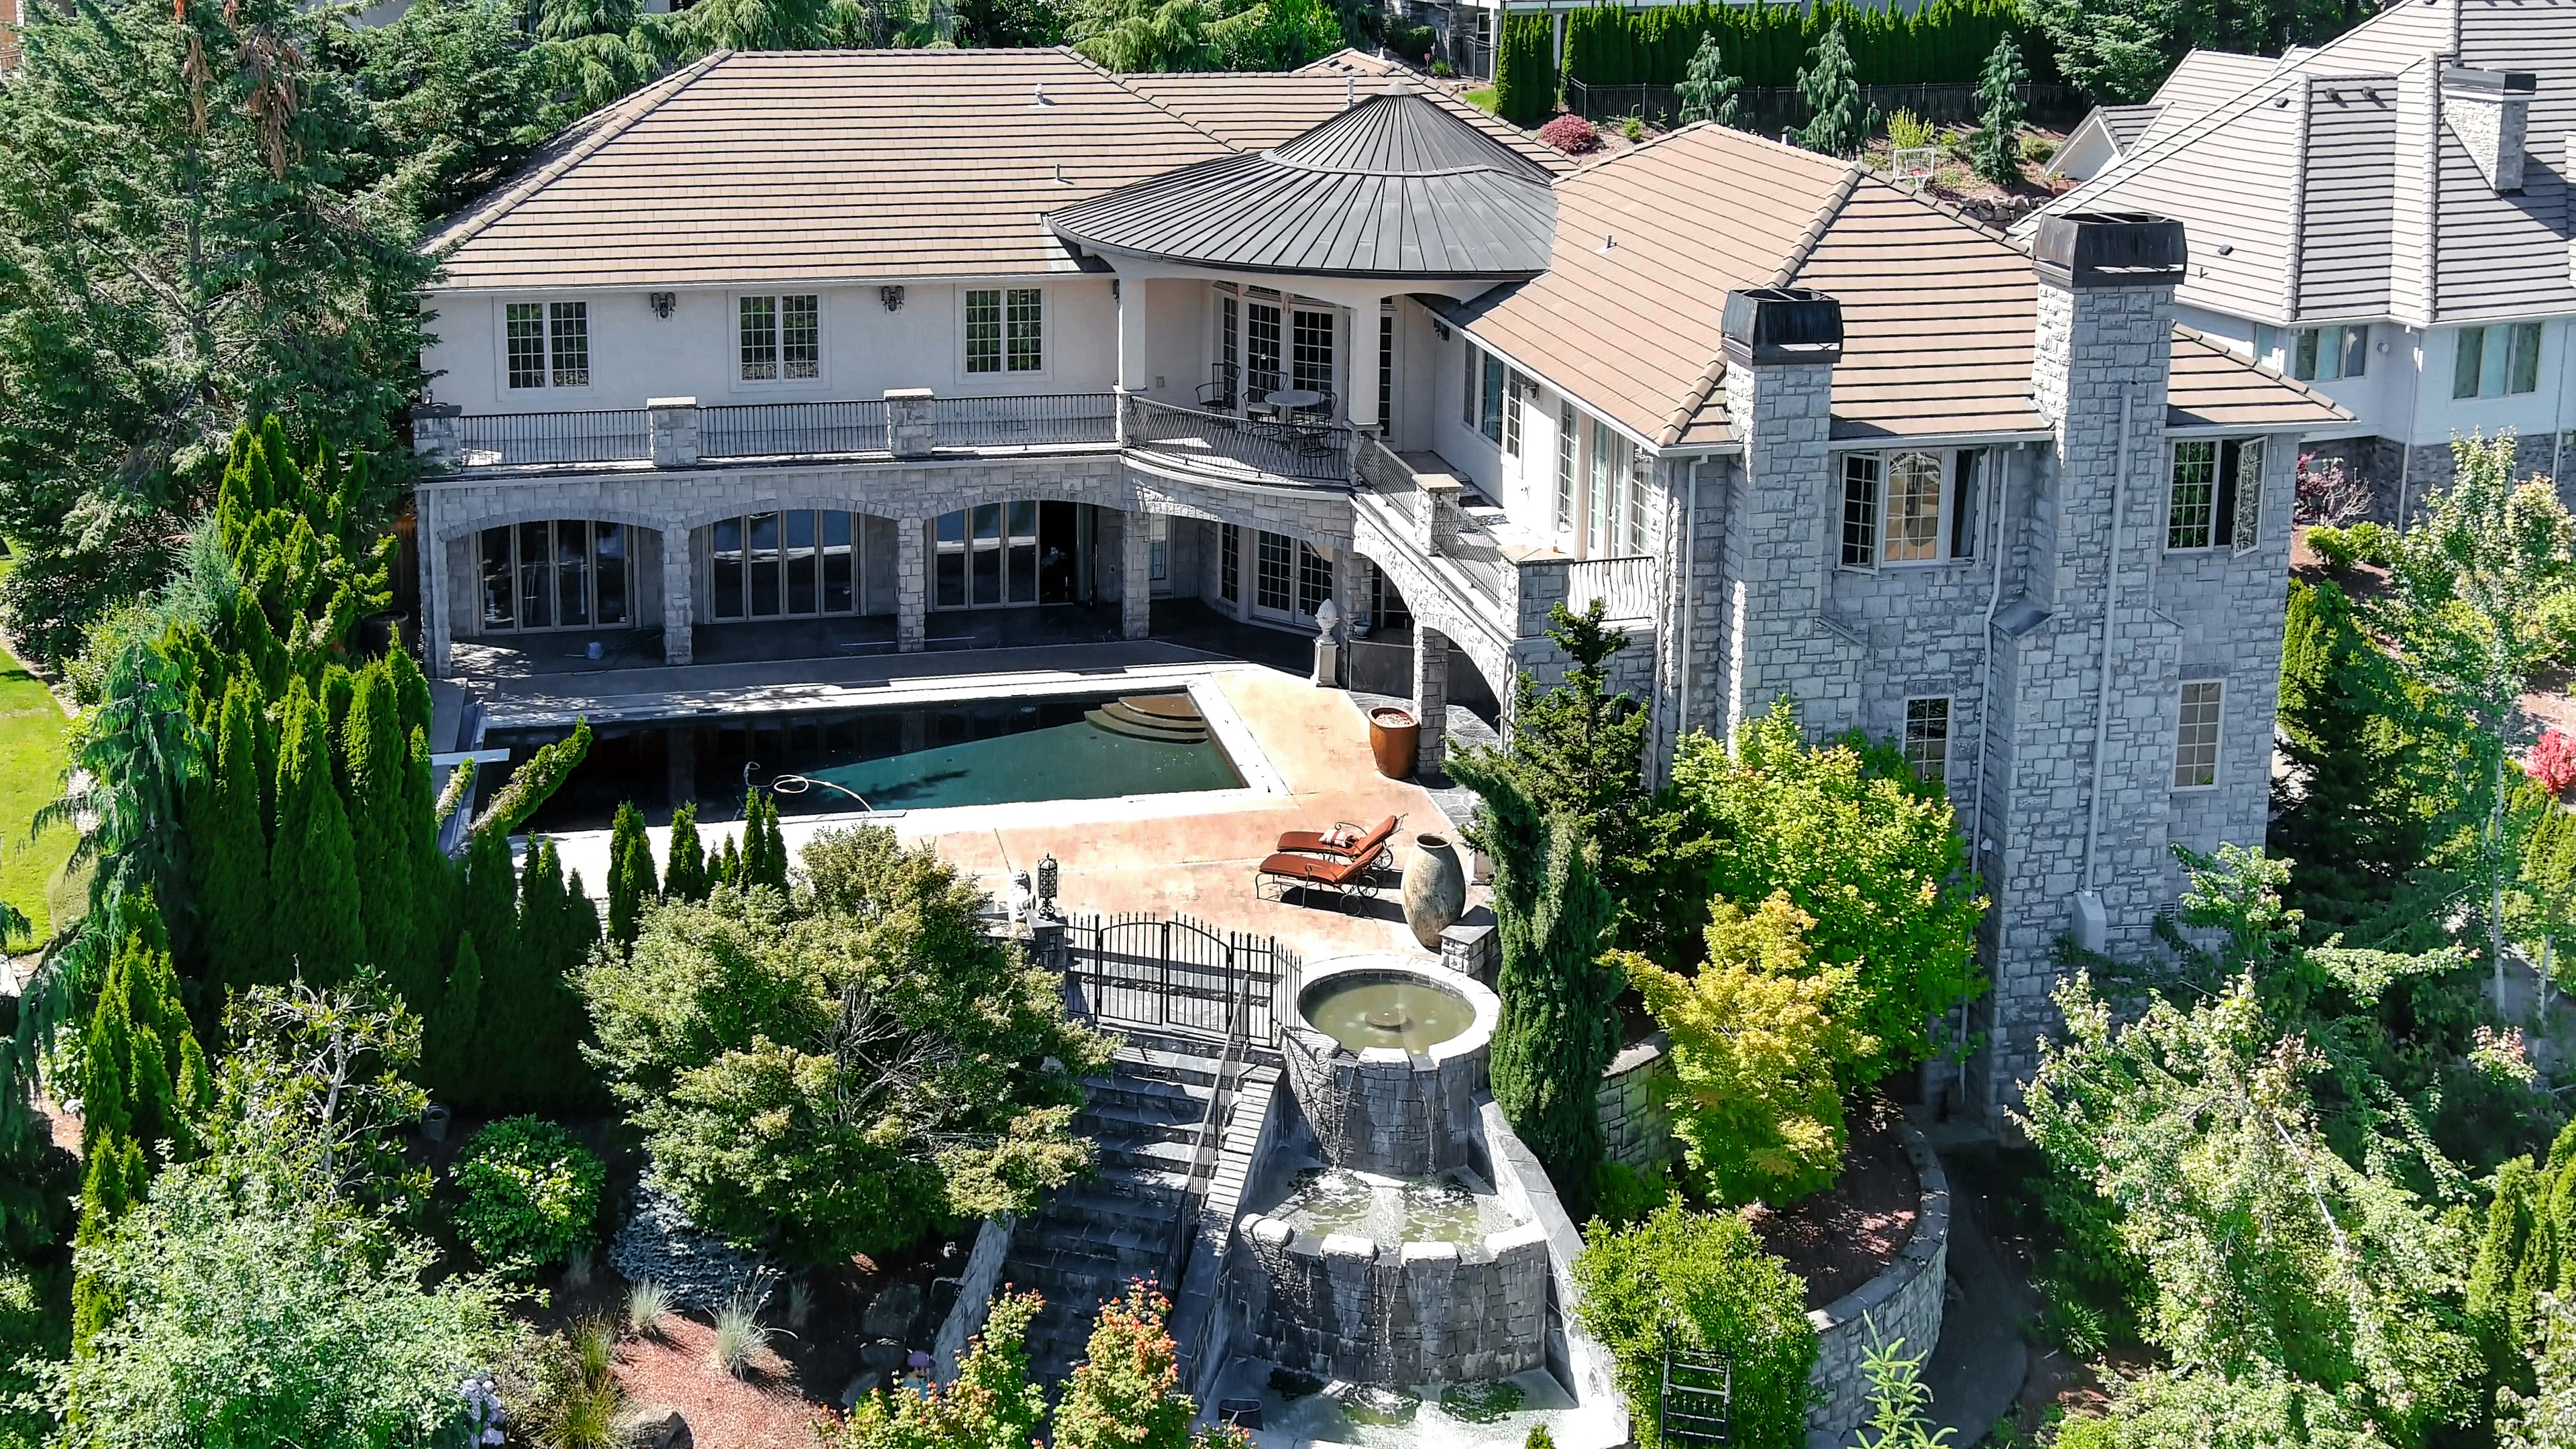 Mansion: The West Linn residence, Blazer hideout, Private pool, Indoor basketball court. 3840x2160 4K Background.